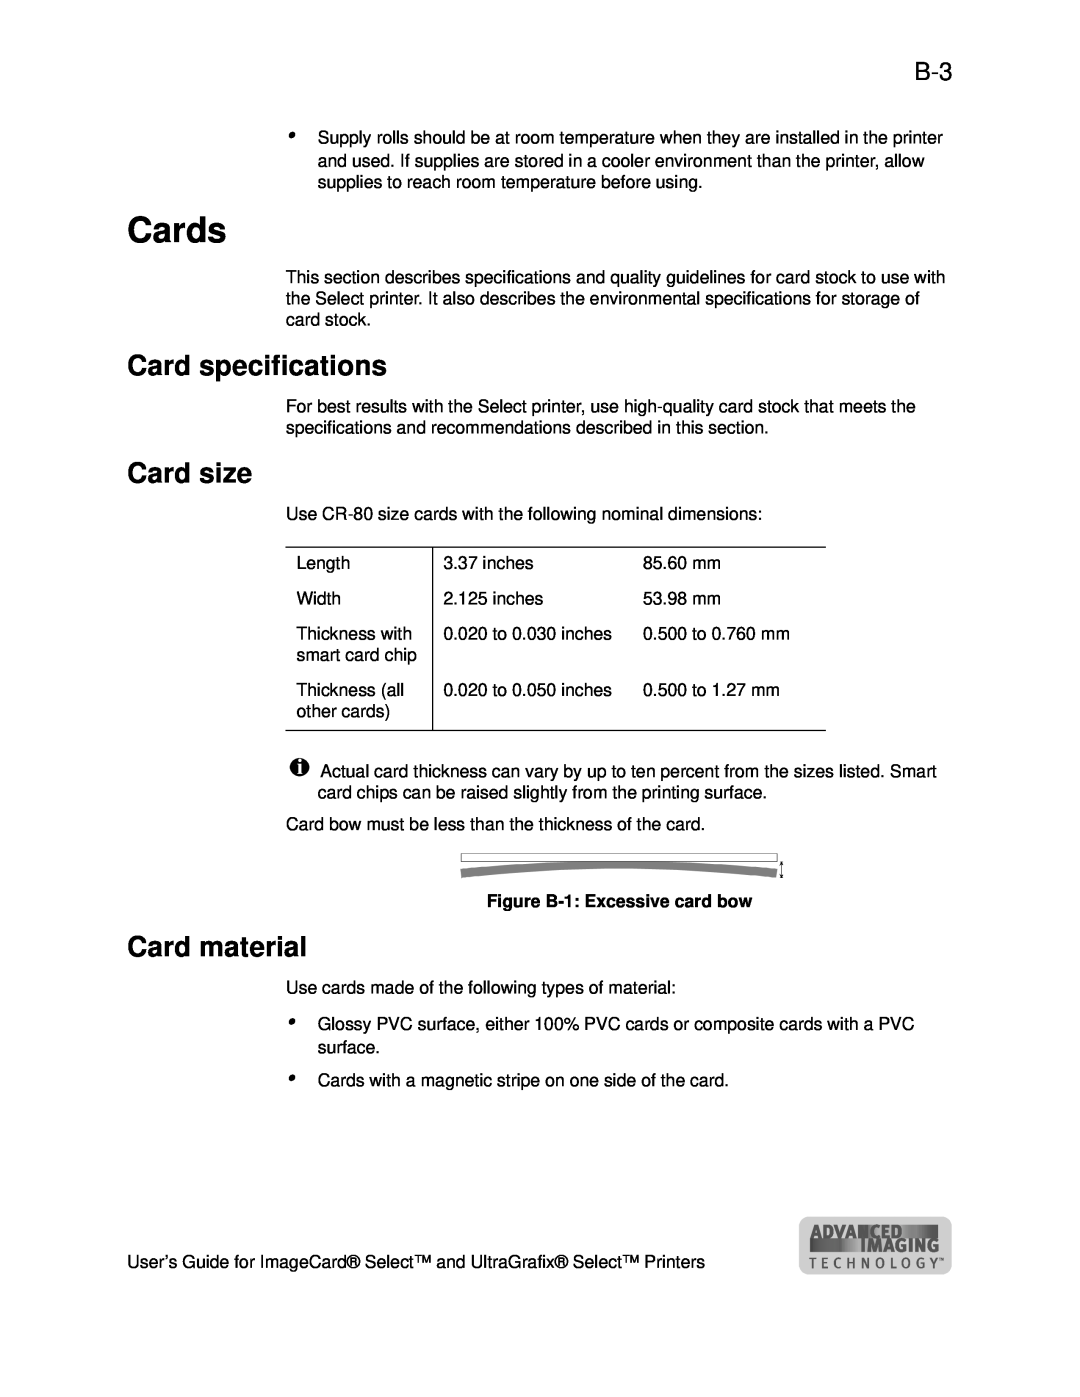 Datacard Group ImageCard SelectTM and UltraGrafix SelectTM Printers Cards, Card specifications, Card size, Card material 